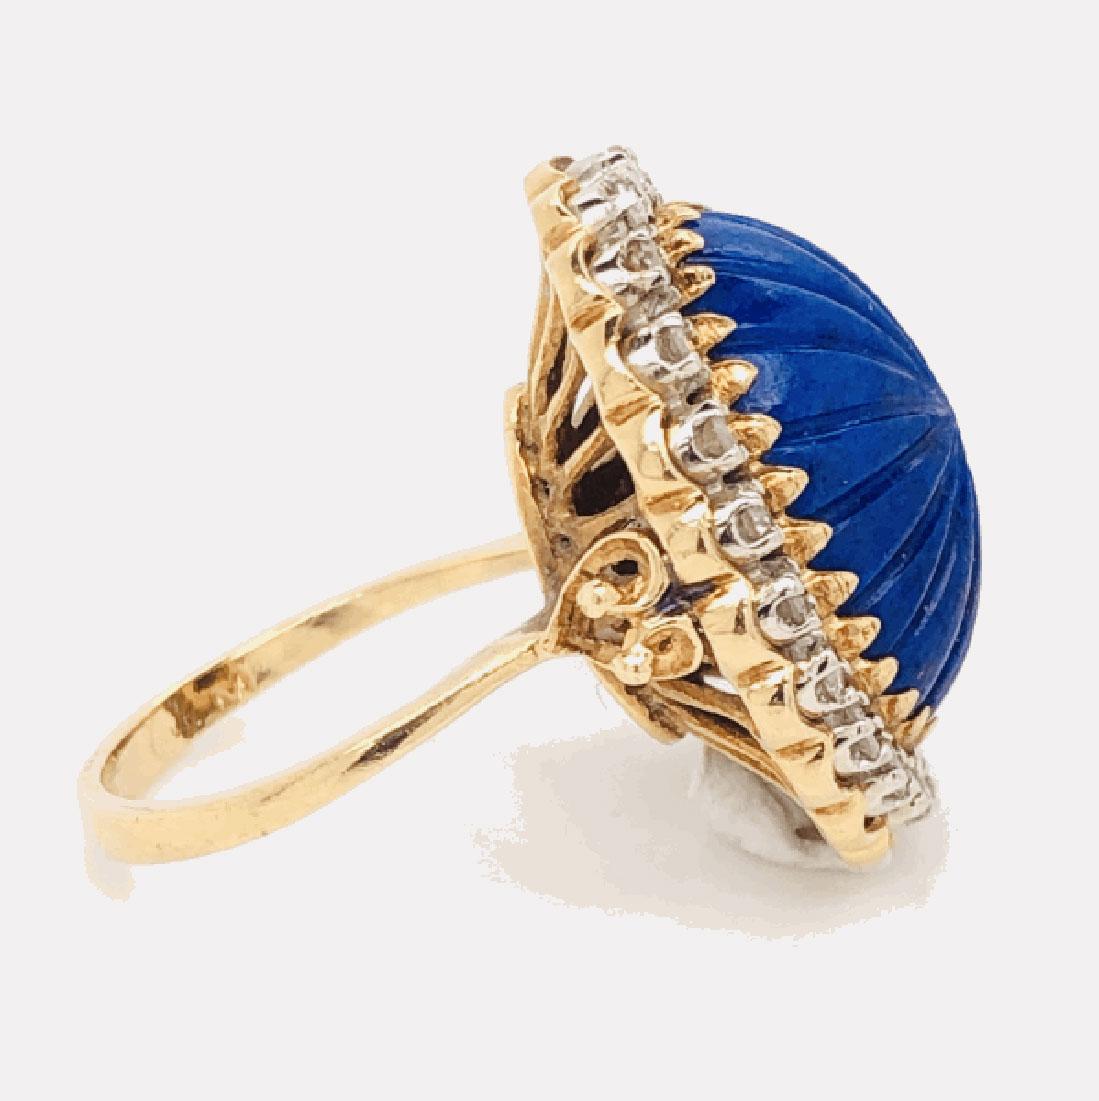 Elegant and finely detailed Lapis Lazuli Cocktail Ring, center set with a Carved Cabochon Lapis Lazuli, bright blue with fabulous tones and small gold flecks, surrounded  with Diamonds weighing  approx. of 0.45 total Carat weight. This beautiful